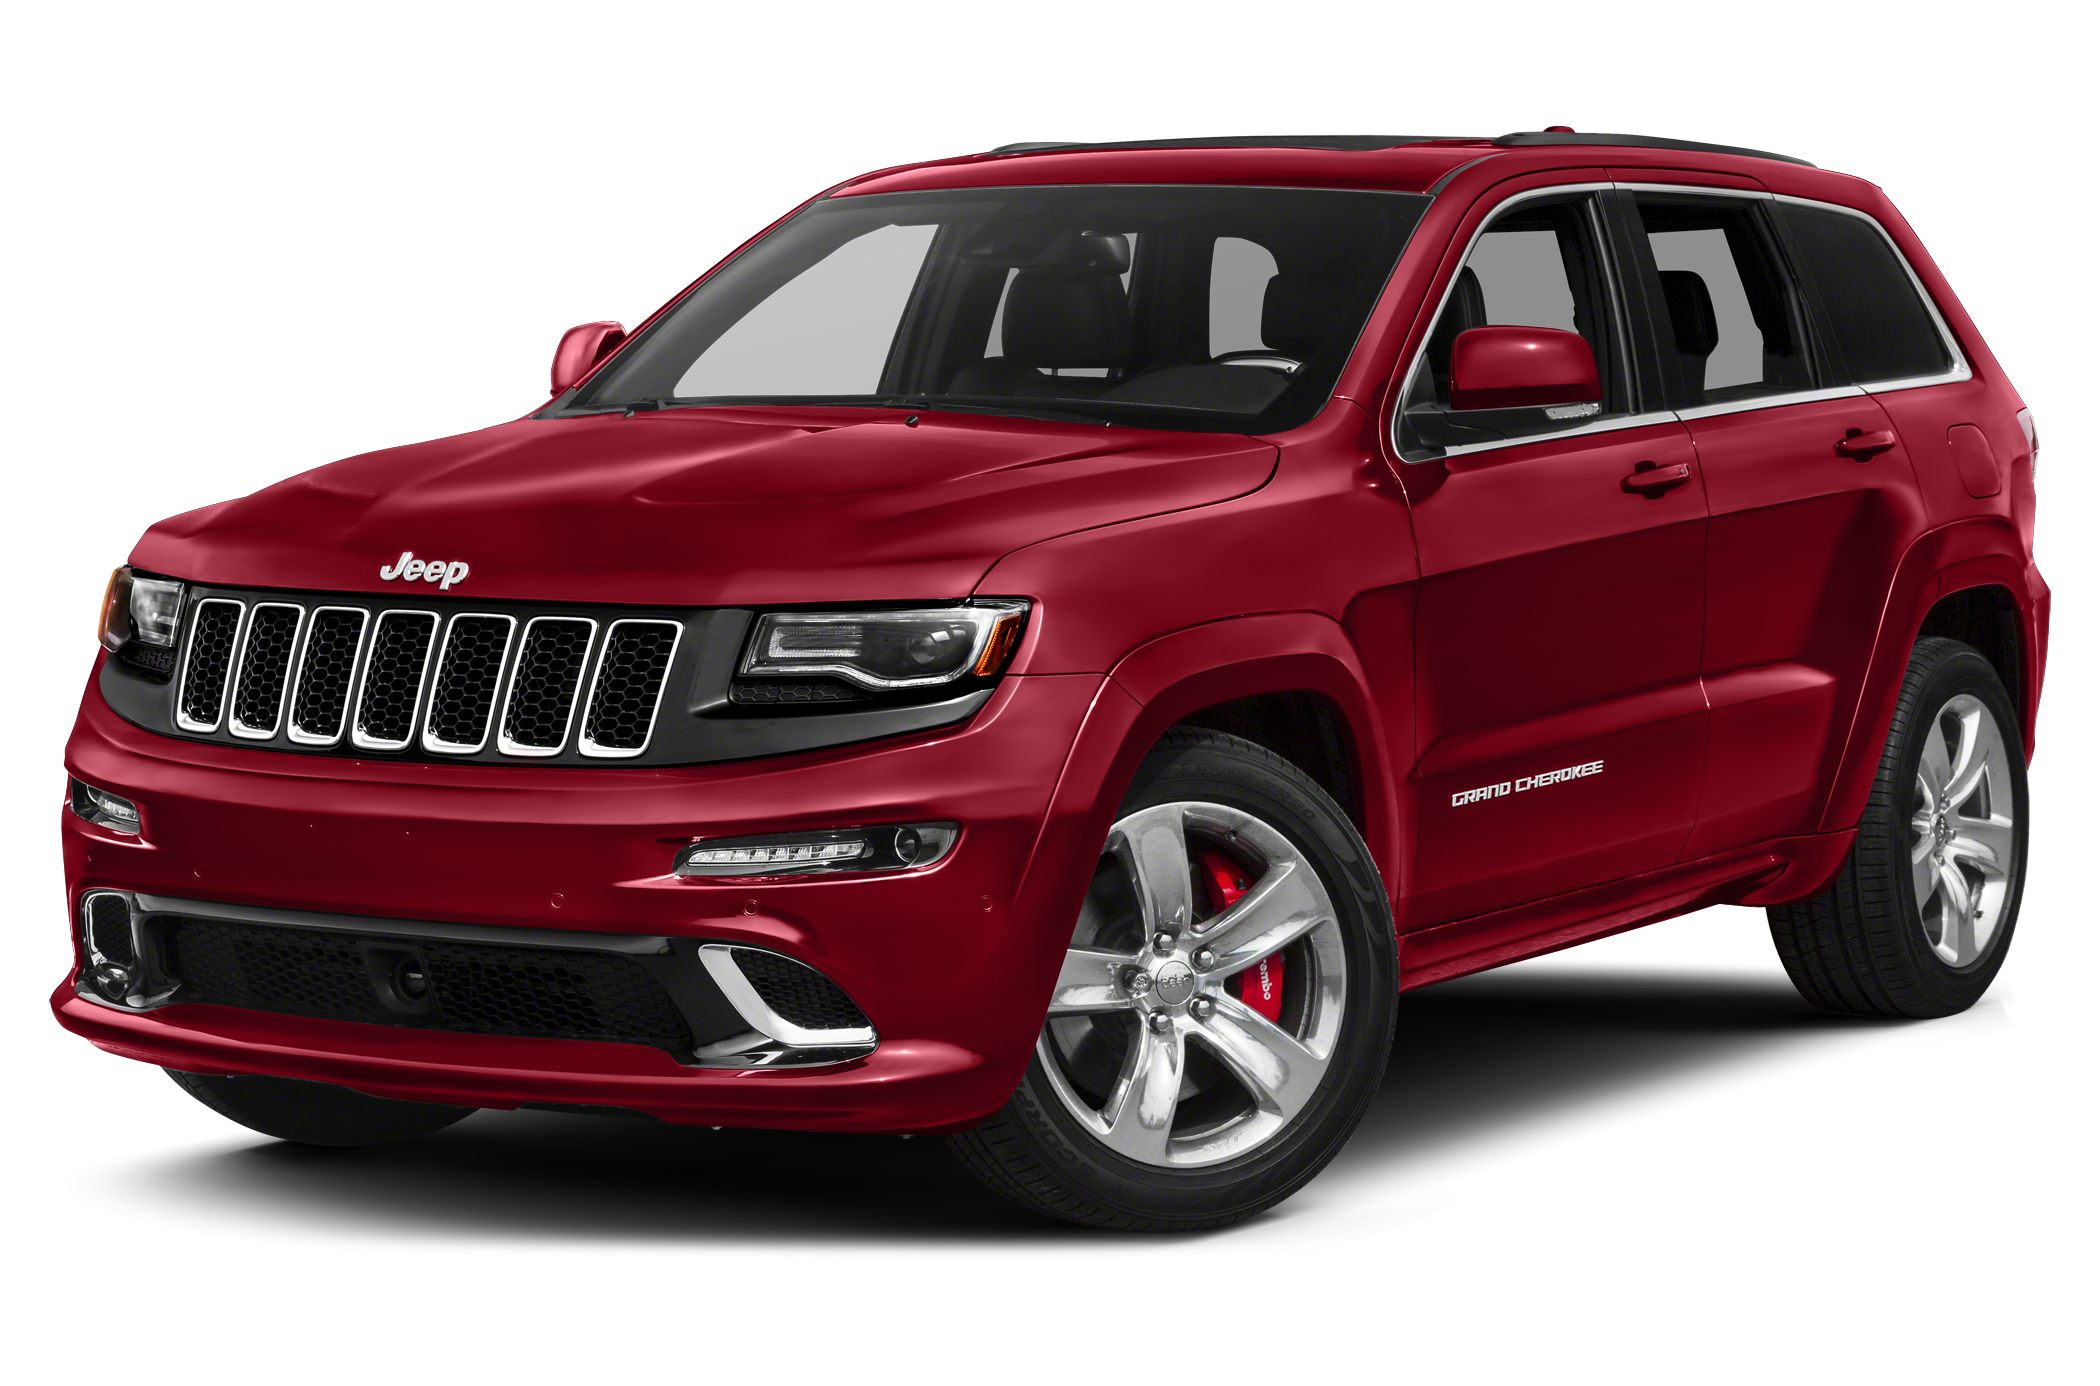 2016 Jeep Grand Cherokee Srt 4dr 4x4 Pictures